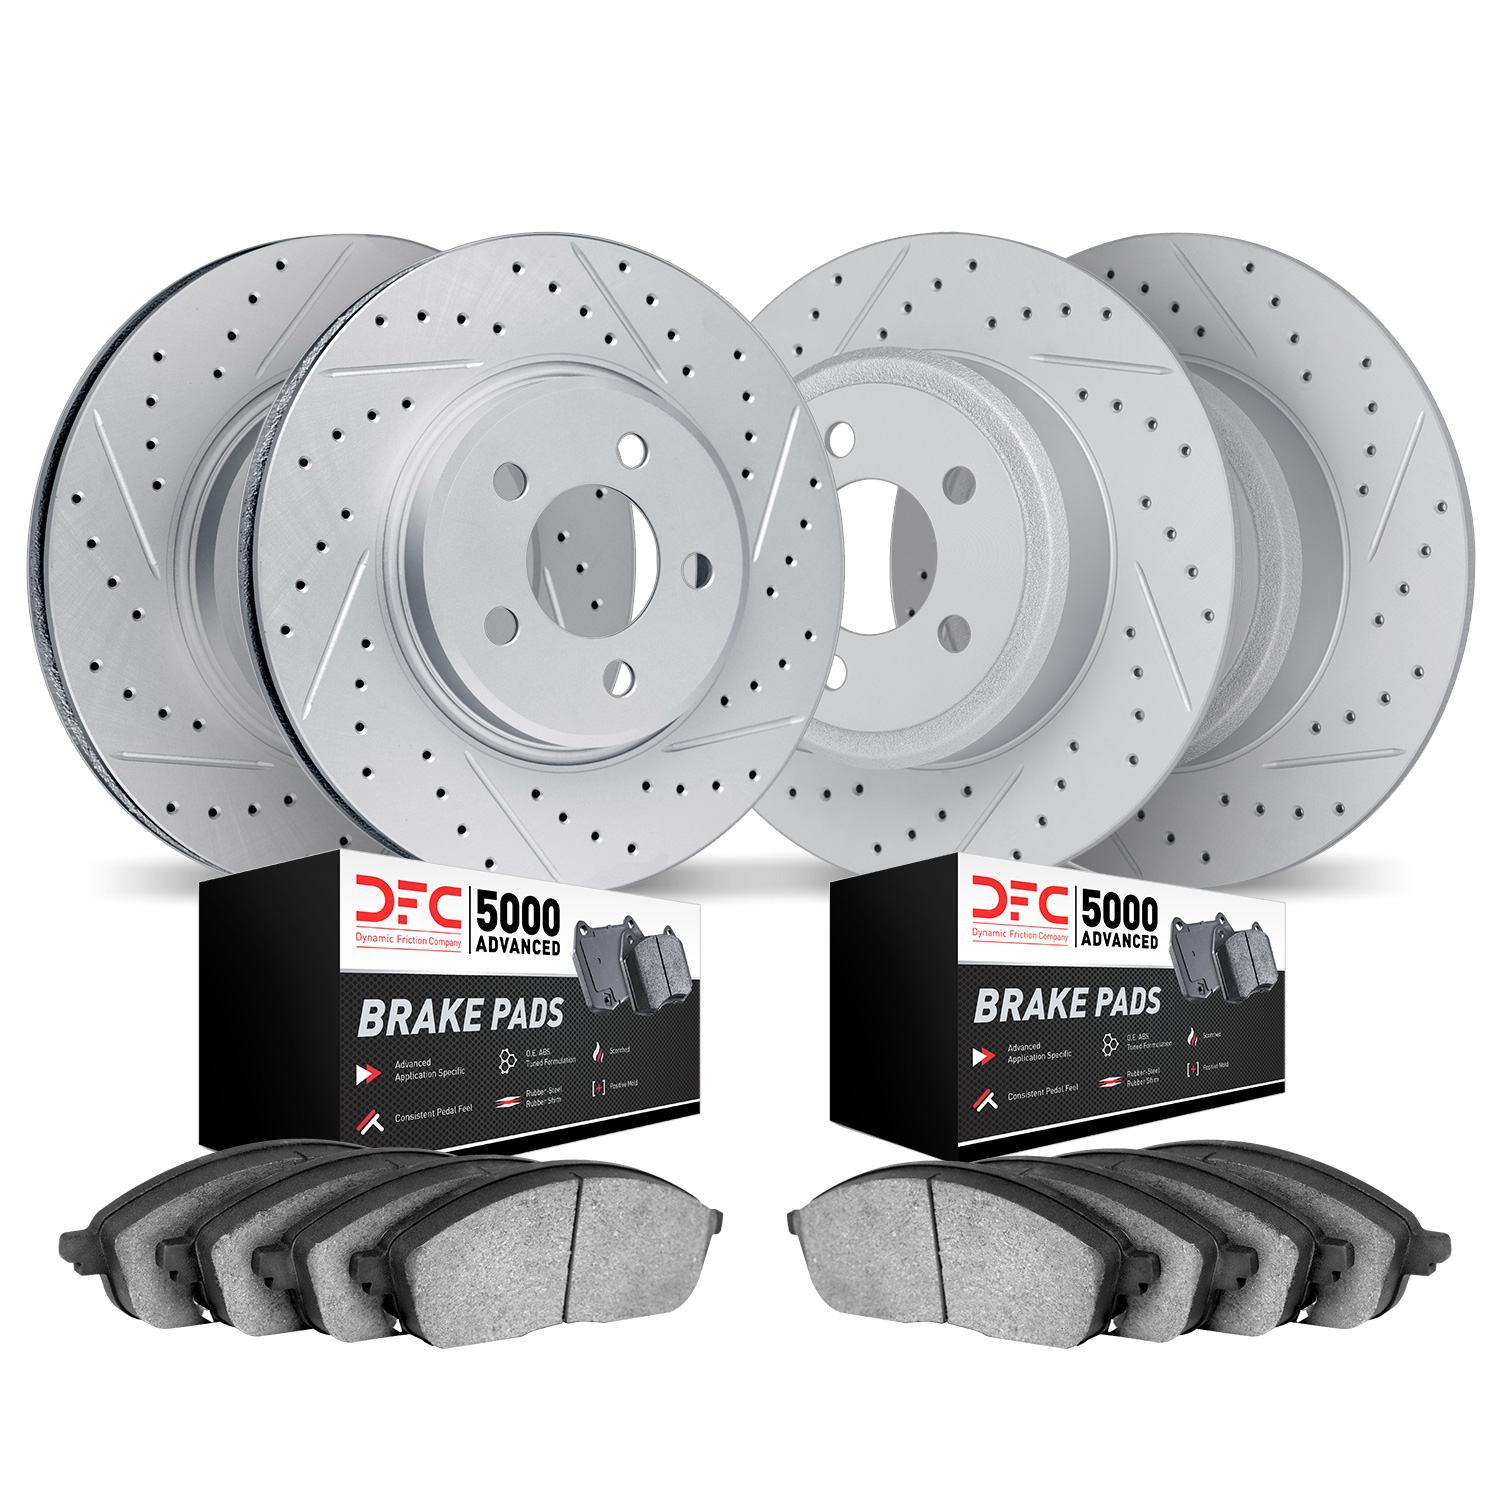 2504-45015 Geoperformance Drilled/Slotted Rotors w/5000 Advanced Brake Pads Kit, 2006-2010 GM, Position: Front and Rear